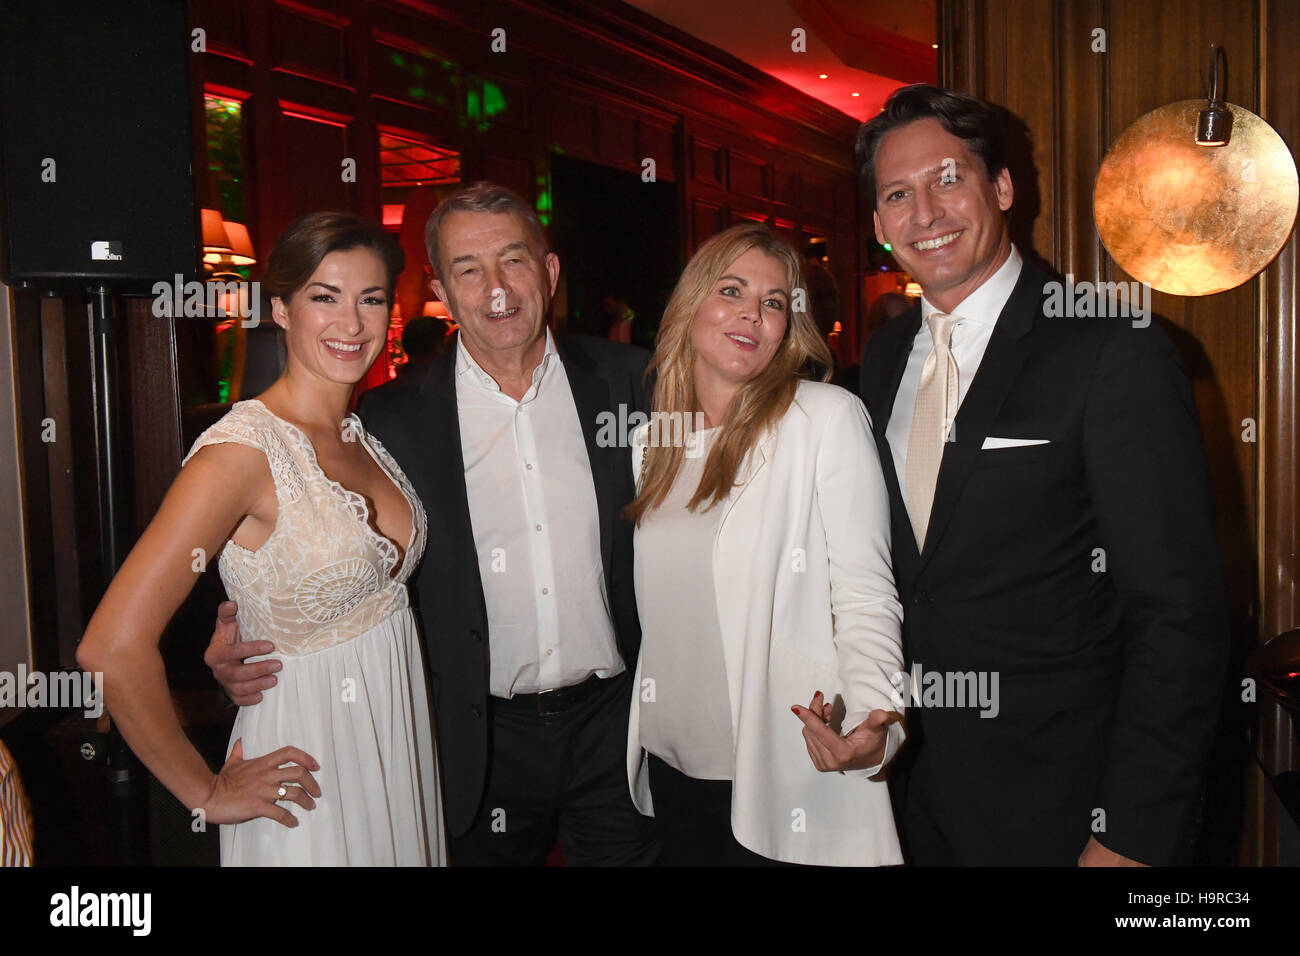 Munich, Germany. 24th Nov, 2016. The General Manager of the Vier Jahreszeiten hotel, Axel Ludwig (r) and his girlfriend Claudia Schwarz (l) pose with Wolfgang Niersbach (2nd l) and his girlfriend Marion Popp (3rd l) during the Christmas Party at the Kempinski Vier Jahreszeiten hotel in Munich, Germany, 24 November 2016. - NO WIRE SERVICE - Photo: Felix Hörhager/dpa/Alamy Live News Stock Photo